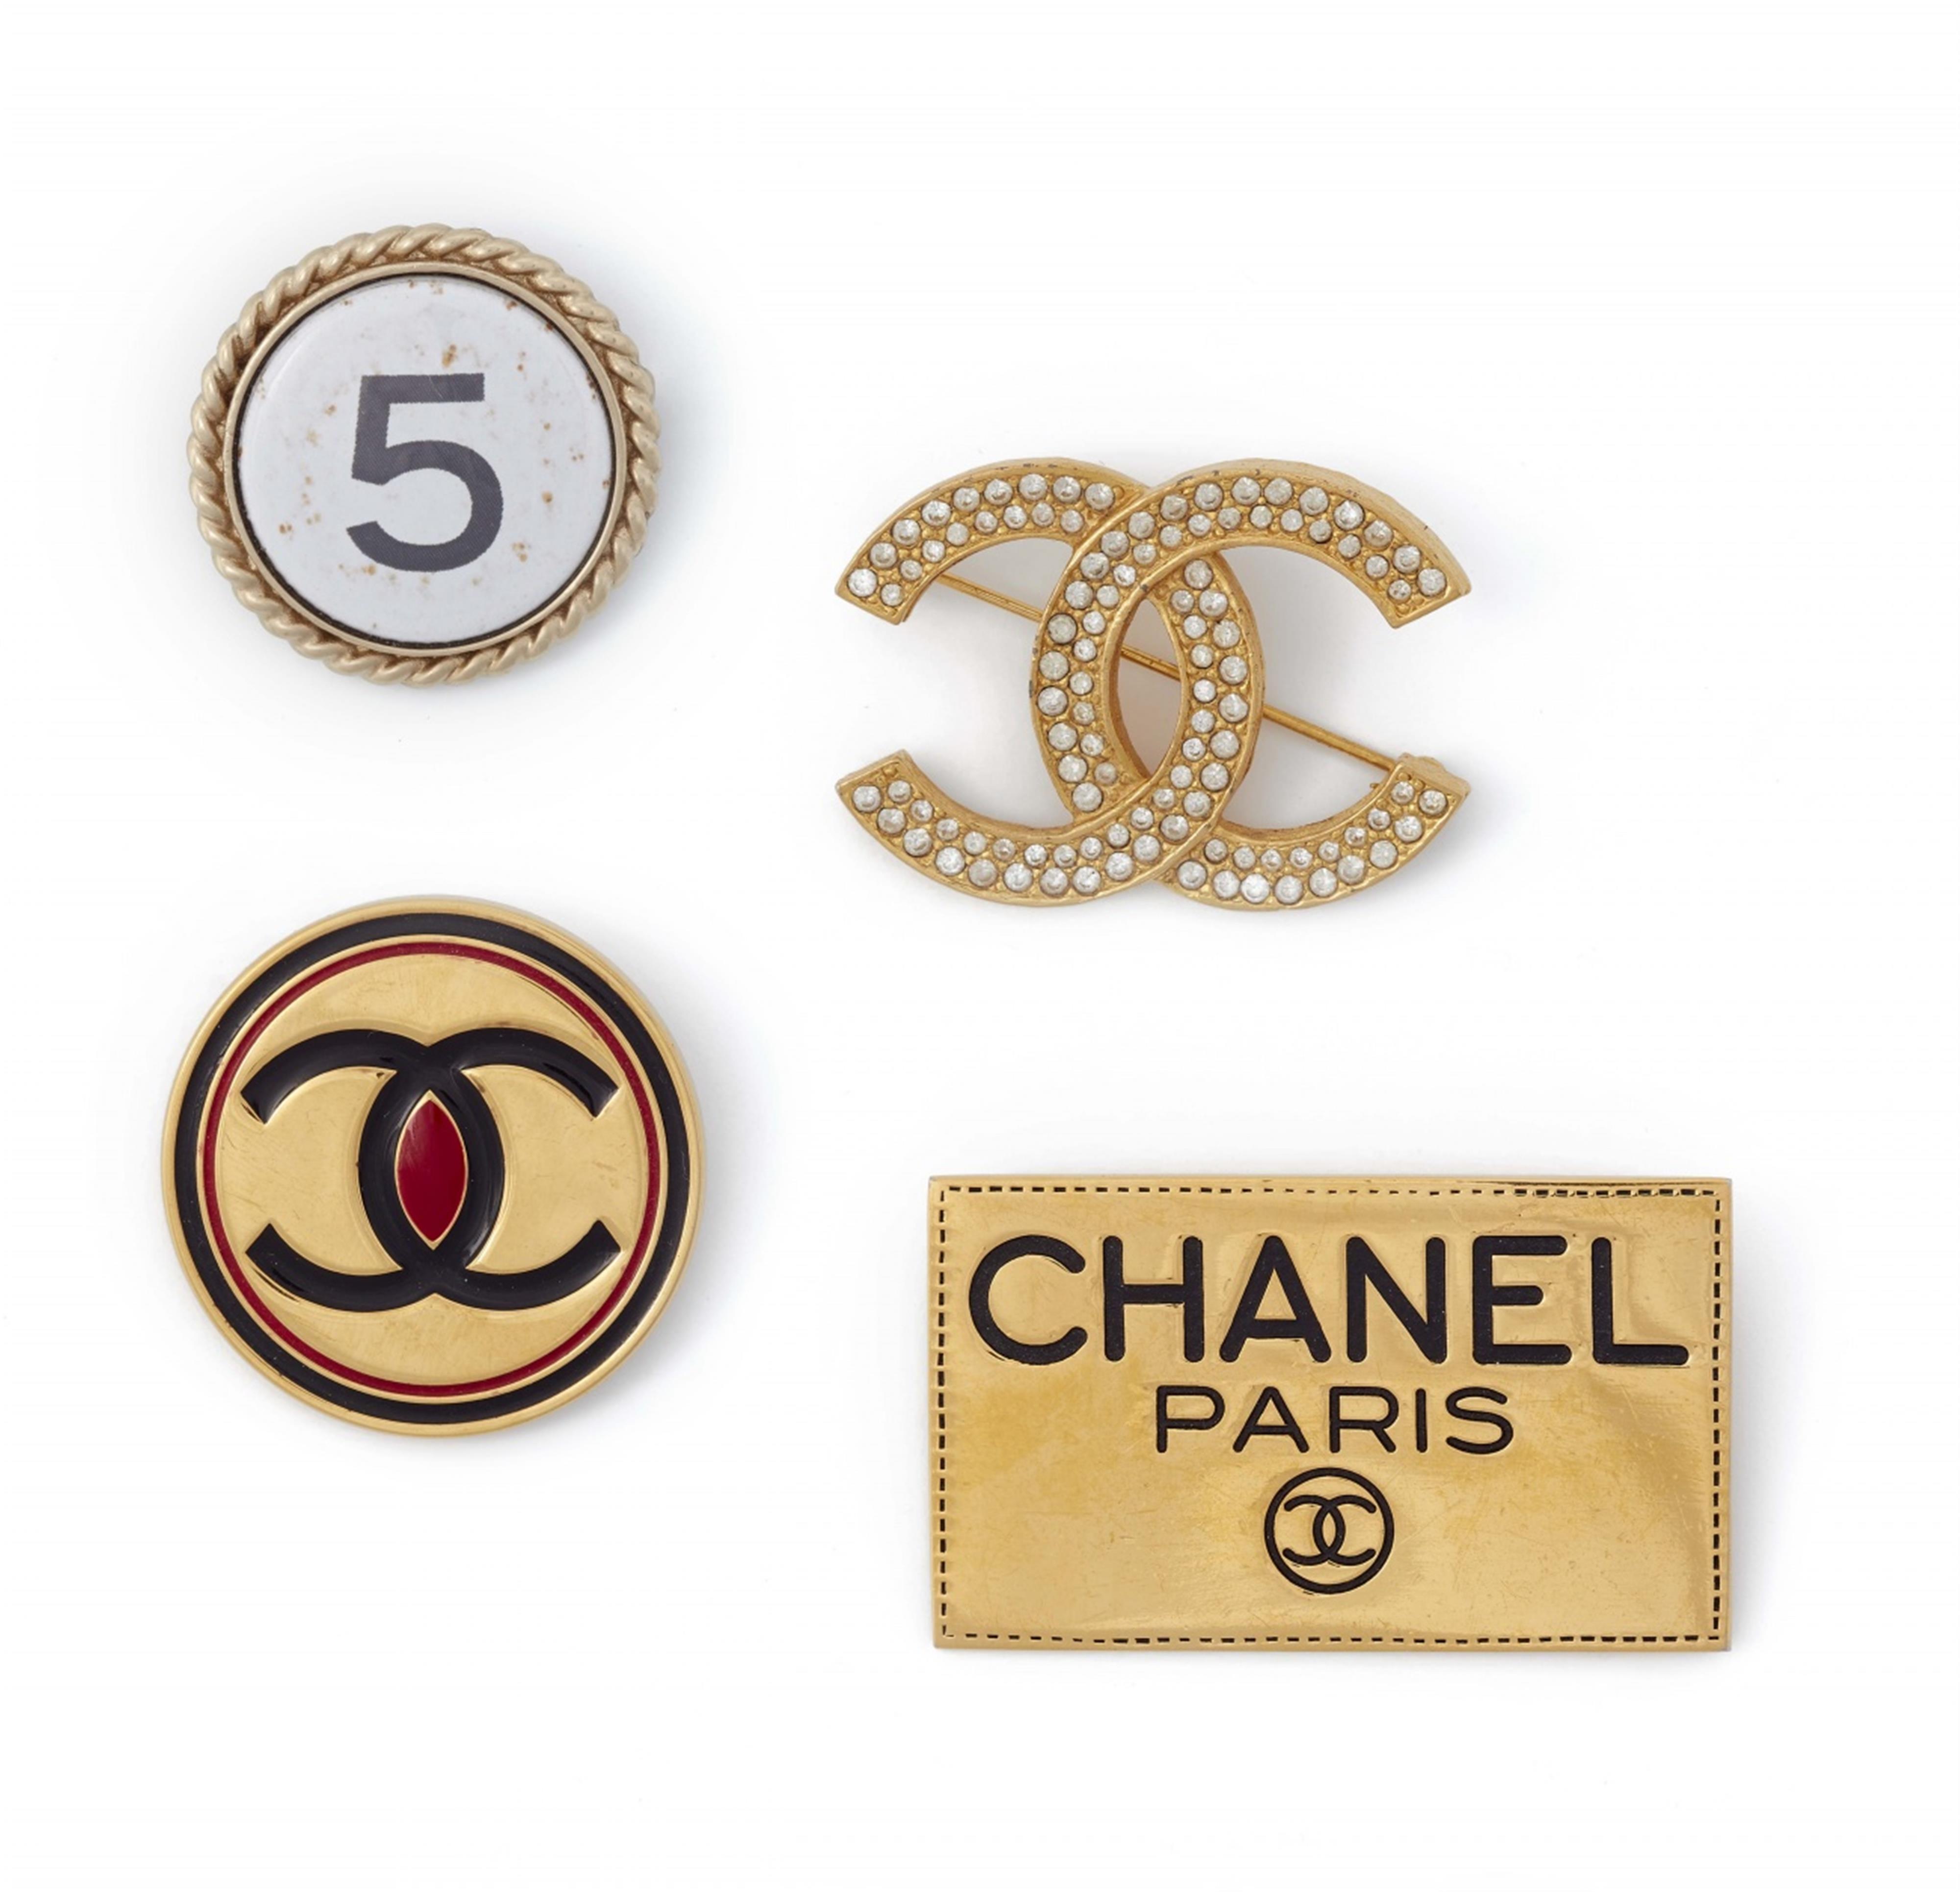 Four Chanel logo pin brooches, 1980s - 2004 - image-1